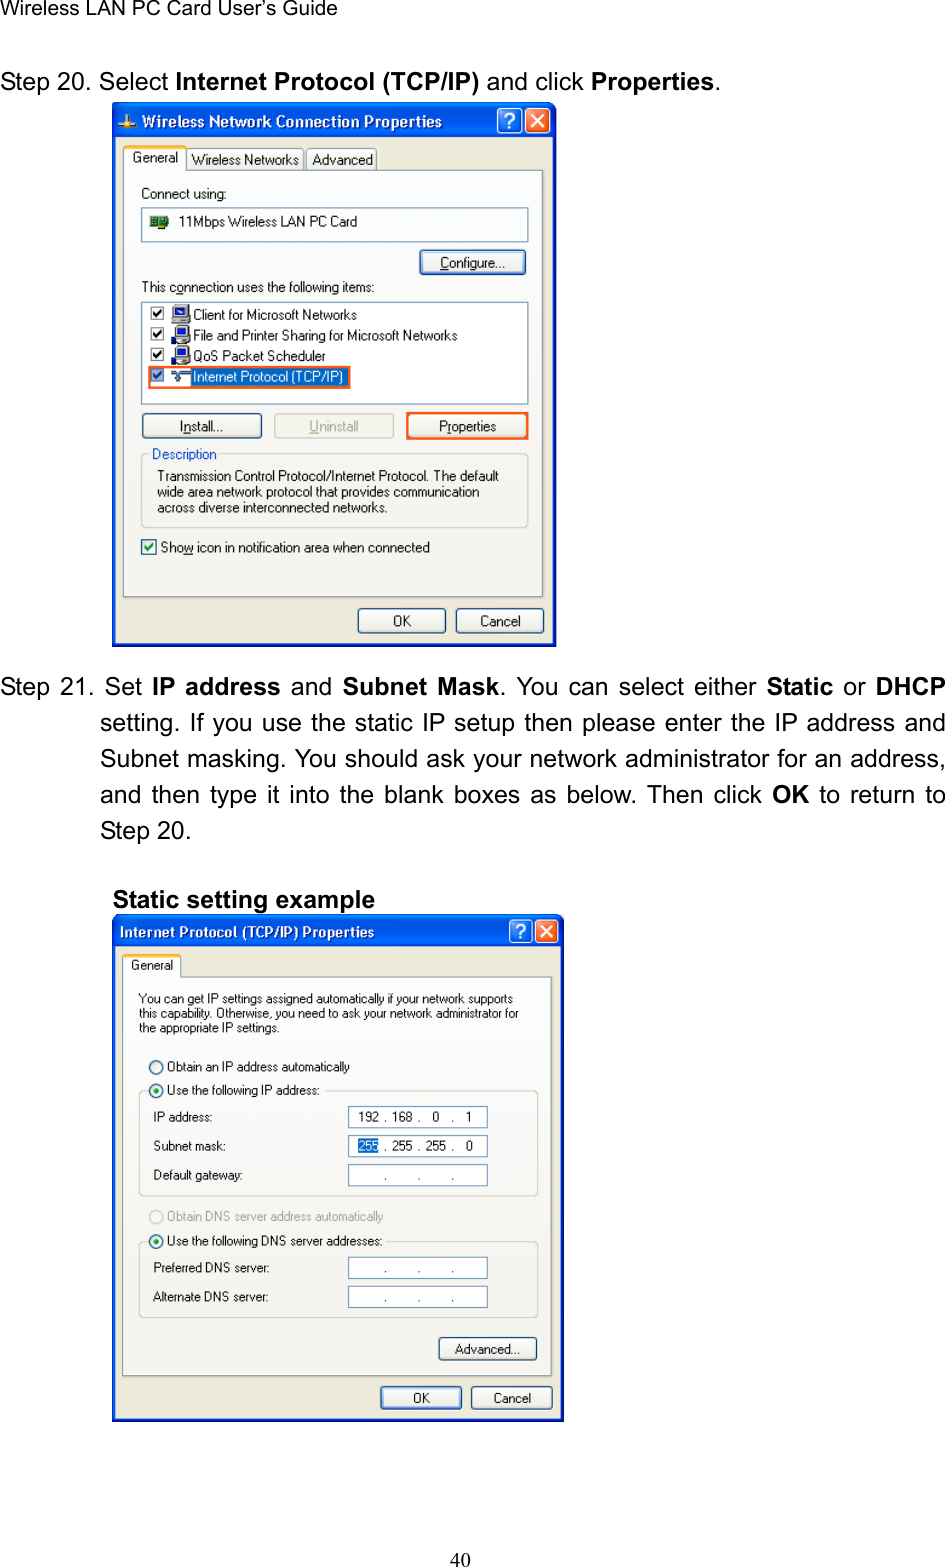 Wireless LAN PC Card User’s Guide40Step 20. Select Internet Protocol (TCP/IP) and click Properties.Step 21. Set IP address and Subnet Mask. You can select either Static or DHCPsetting. If you use the static IP setup then please enter the IP address andSubnet masking. You should ask your network administrator for an address,and then type it into the blank boxes as below. Then click OK  to return toStep 20.Static setting example